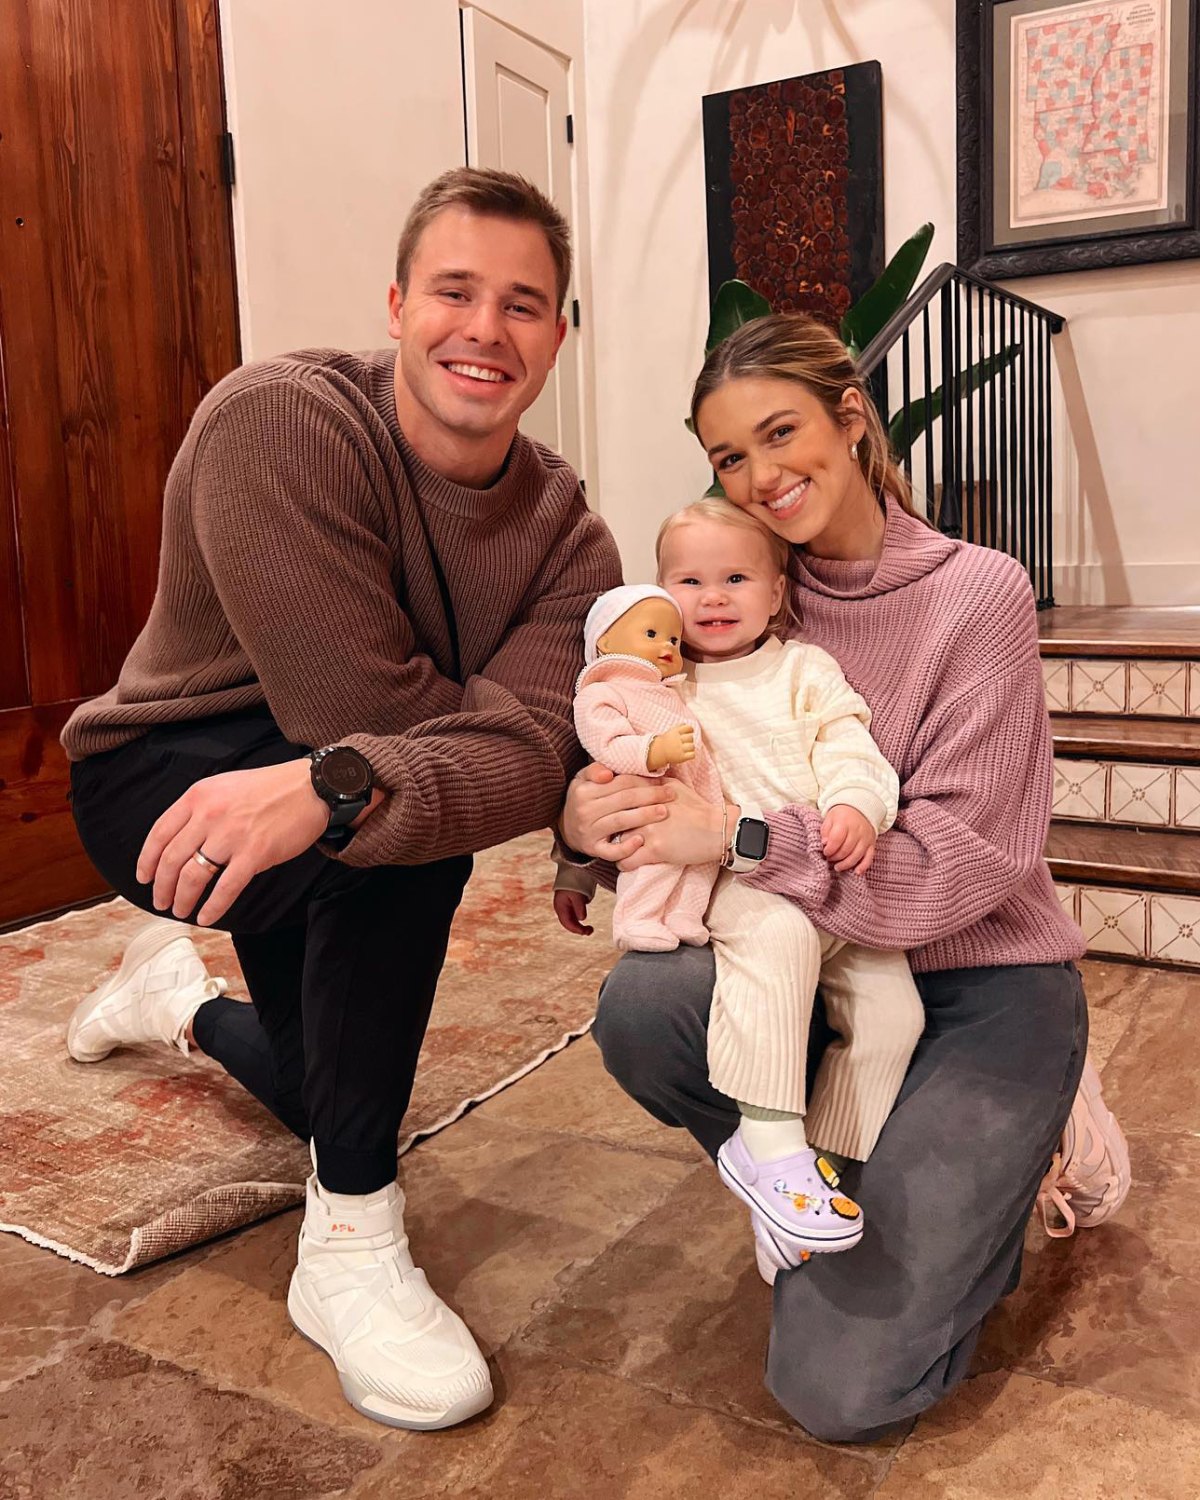 Sadie Robertson Is Pregnant, Expecting 2nd Baby With Husband